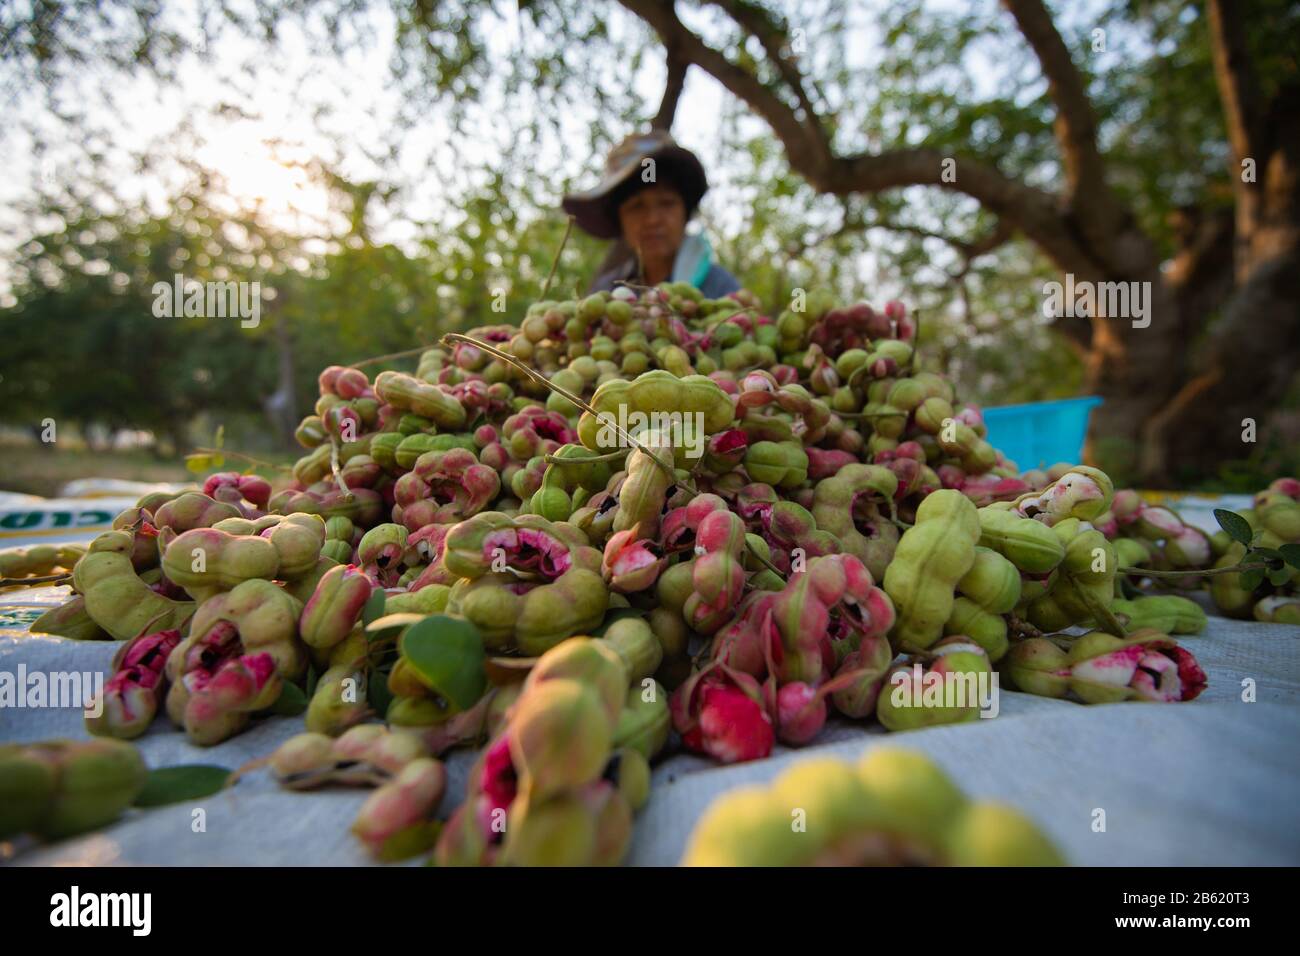 March 1, 2020, Ratchaburi, Thailand: A farmer sorts harvested pithecellobium dulce fruits at their plantation in Ratchaburi..The harvest of the Pithecellobium dulce also known as Madras Thorn is from December to March. (Credit Image: © Vachira Kalong/SOPA Images via ZUMA Wire) Stock Photo